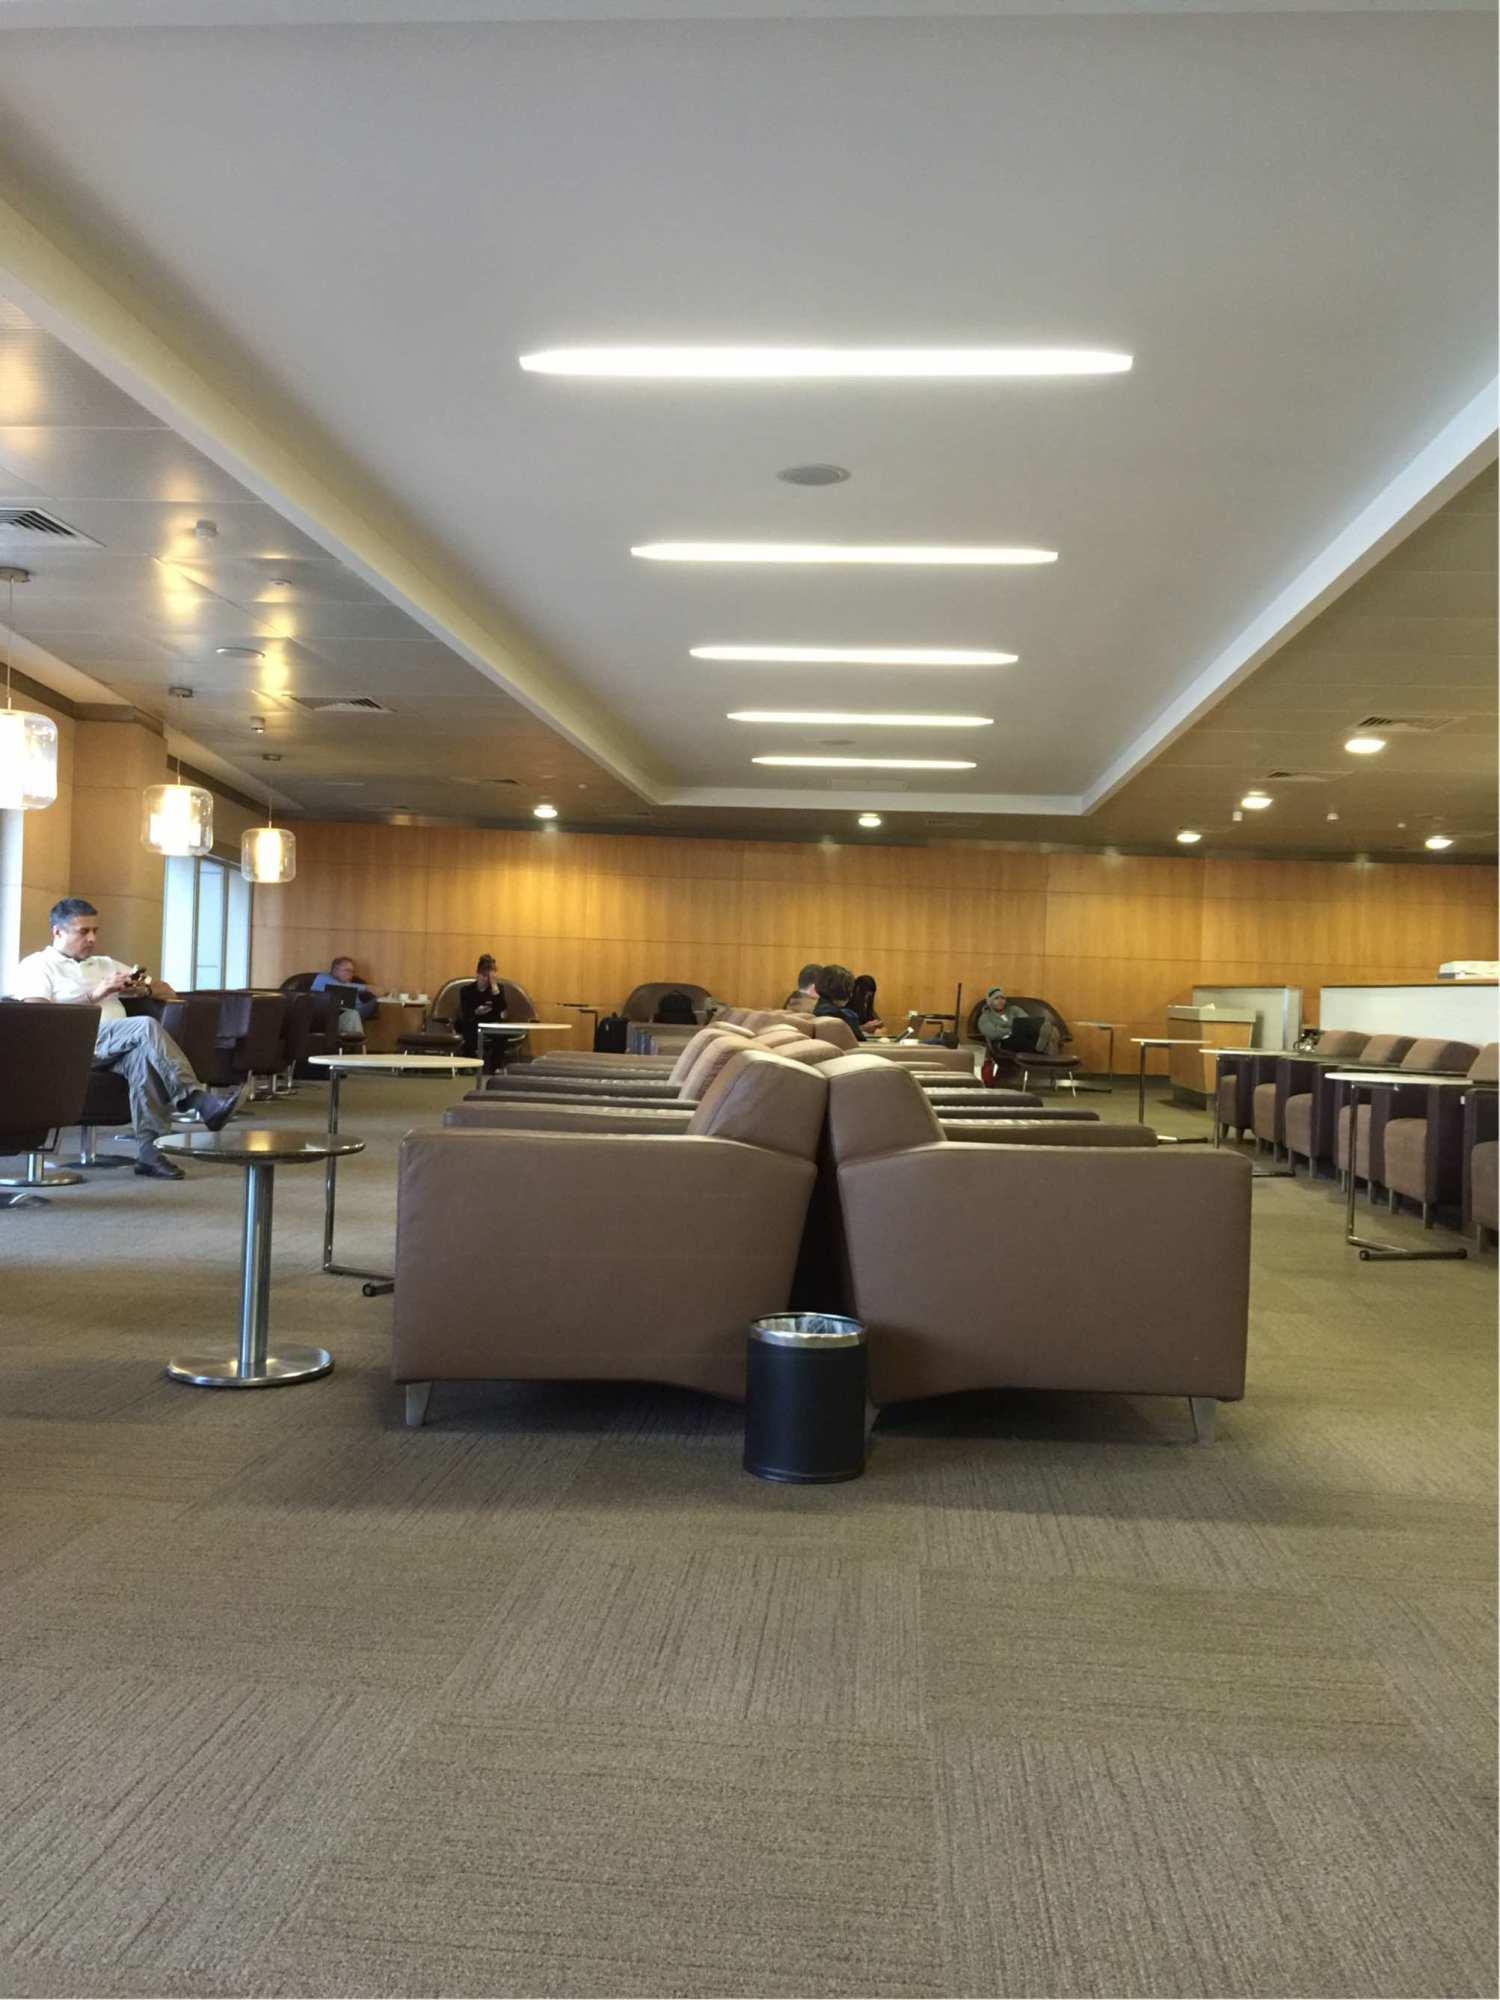 American Airlines International First Class Lounge image 11 of 16